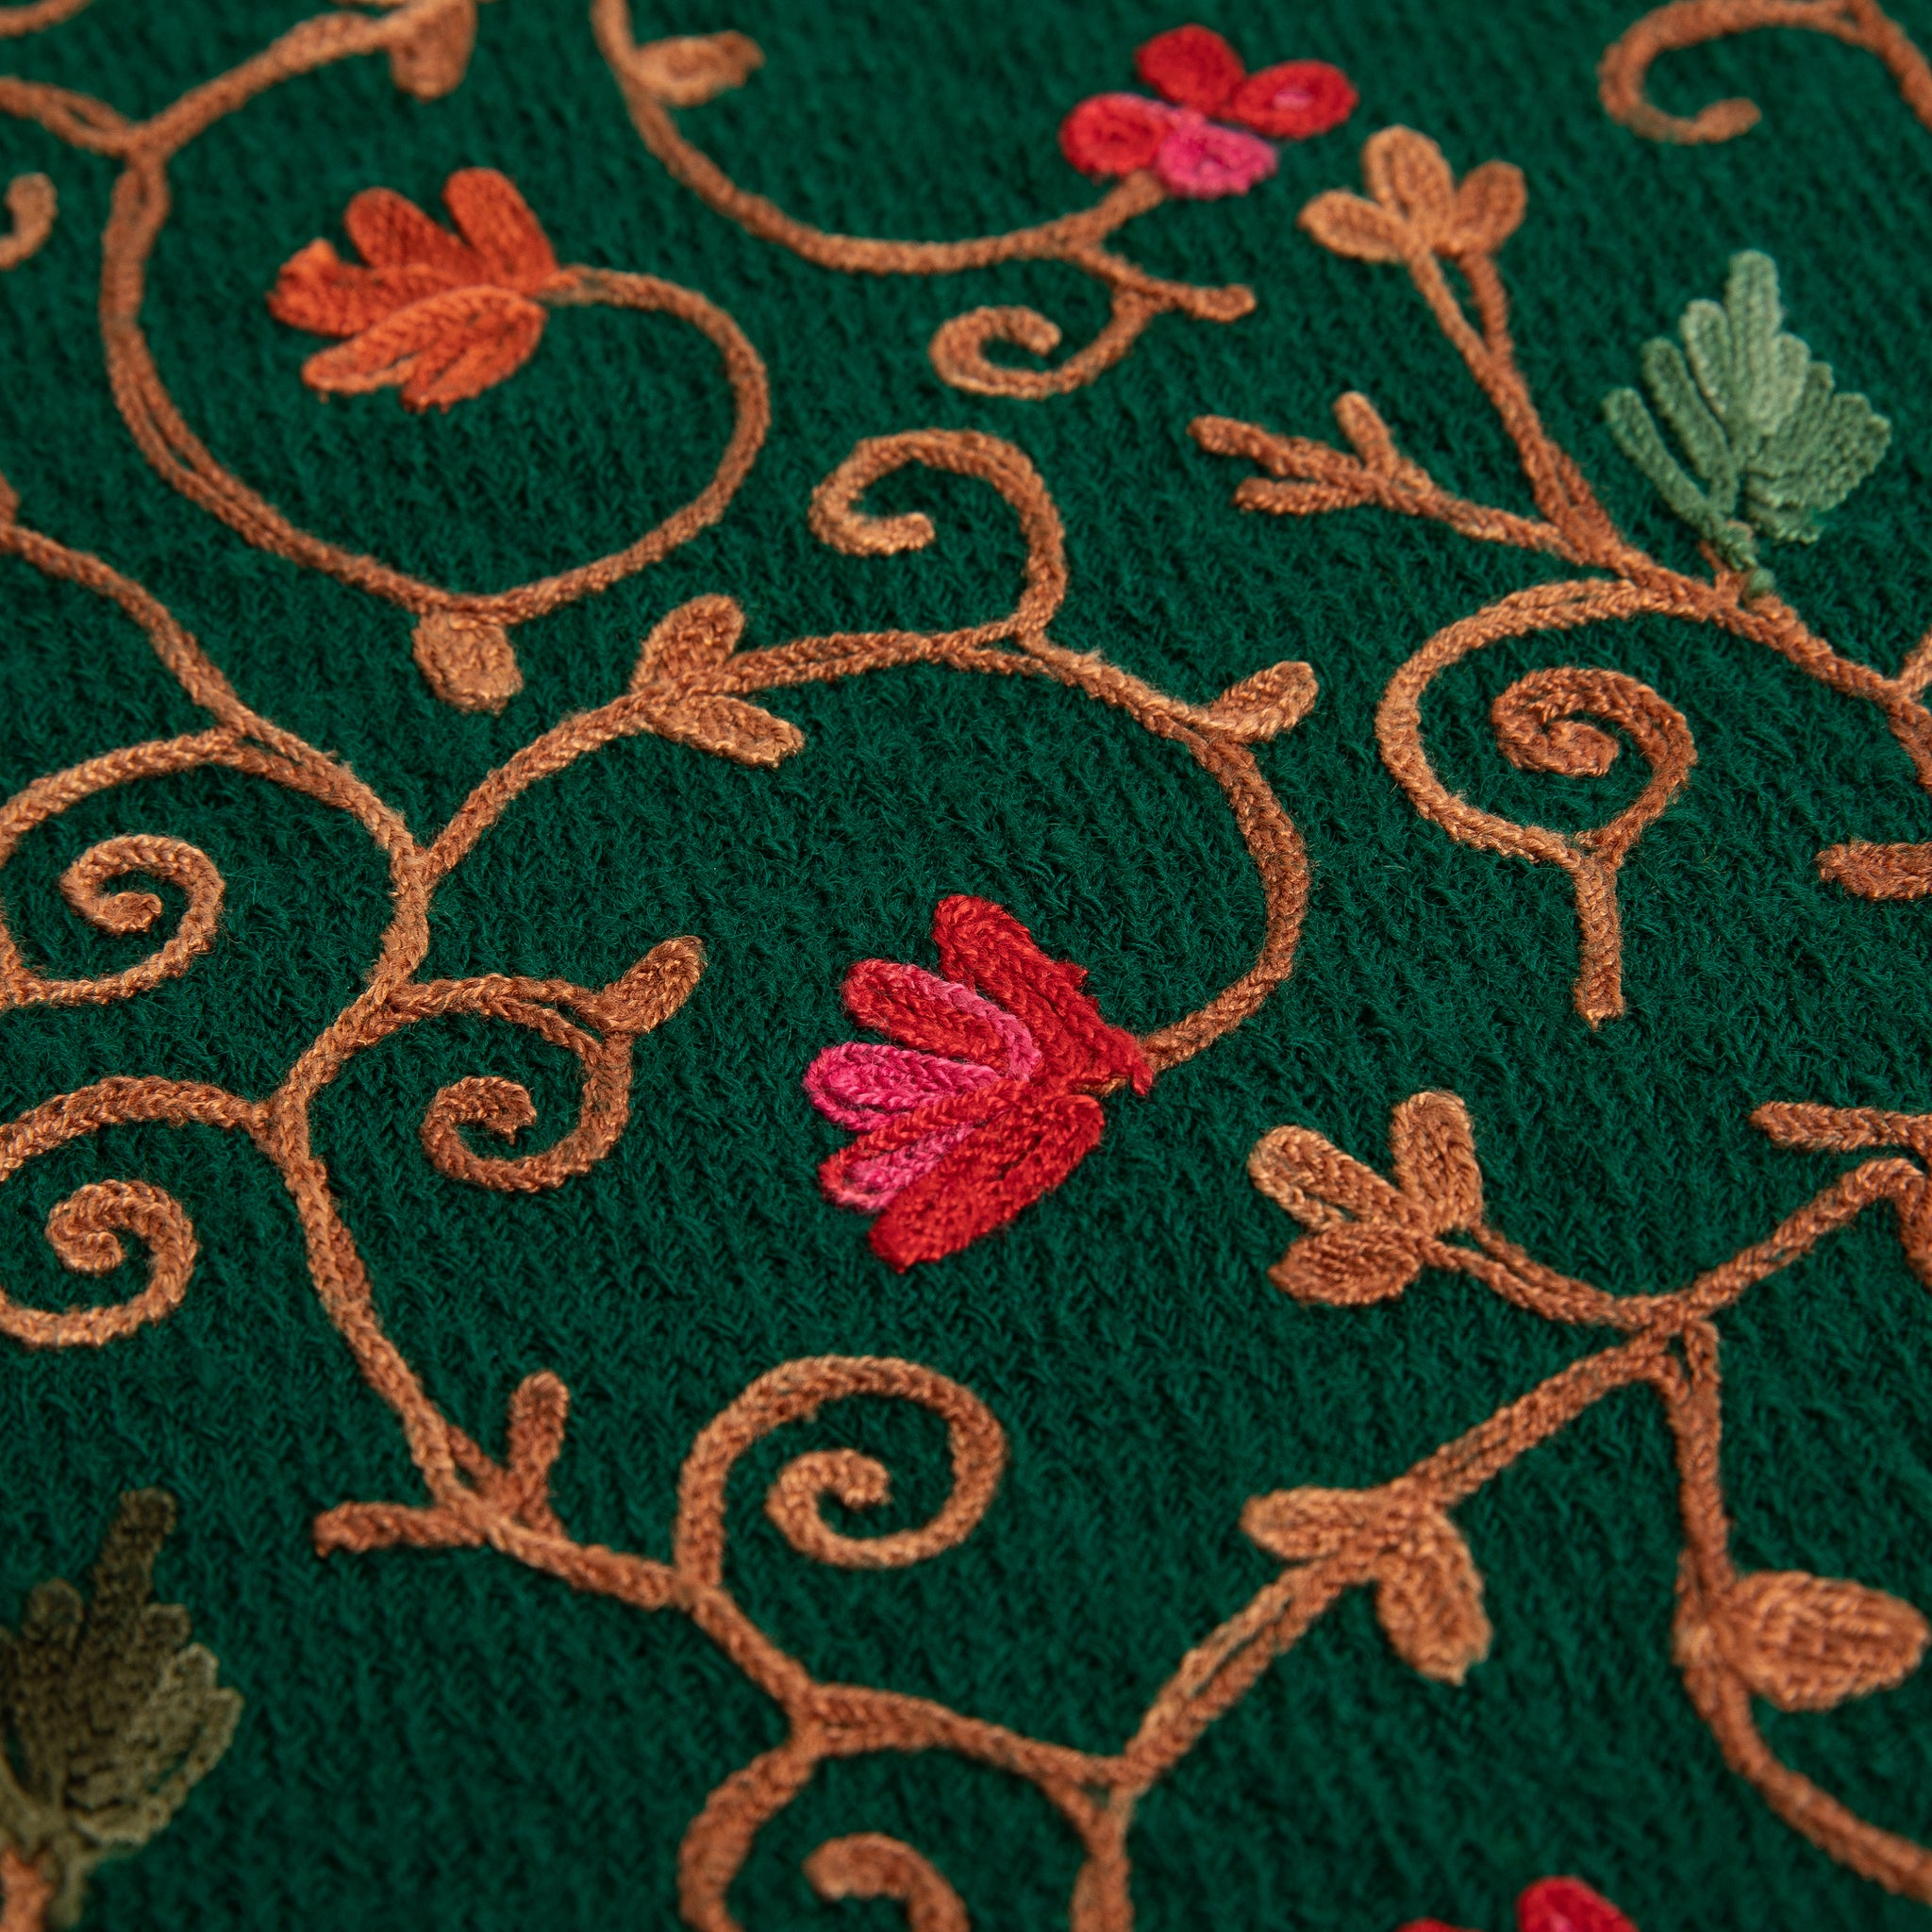 EMBROIDERED WOOL THROW